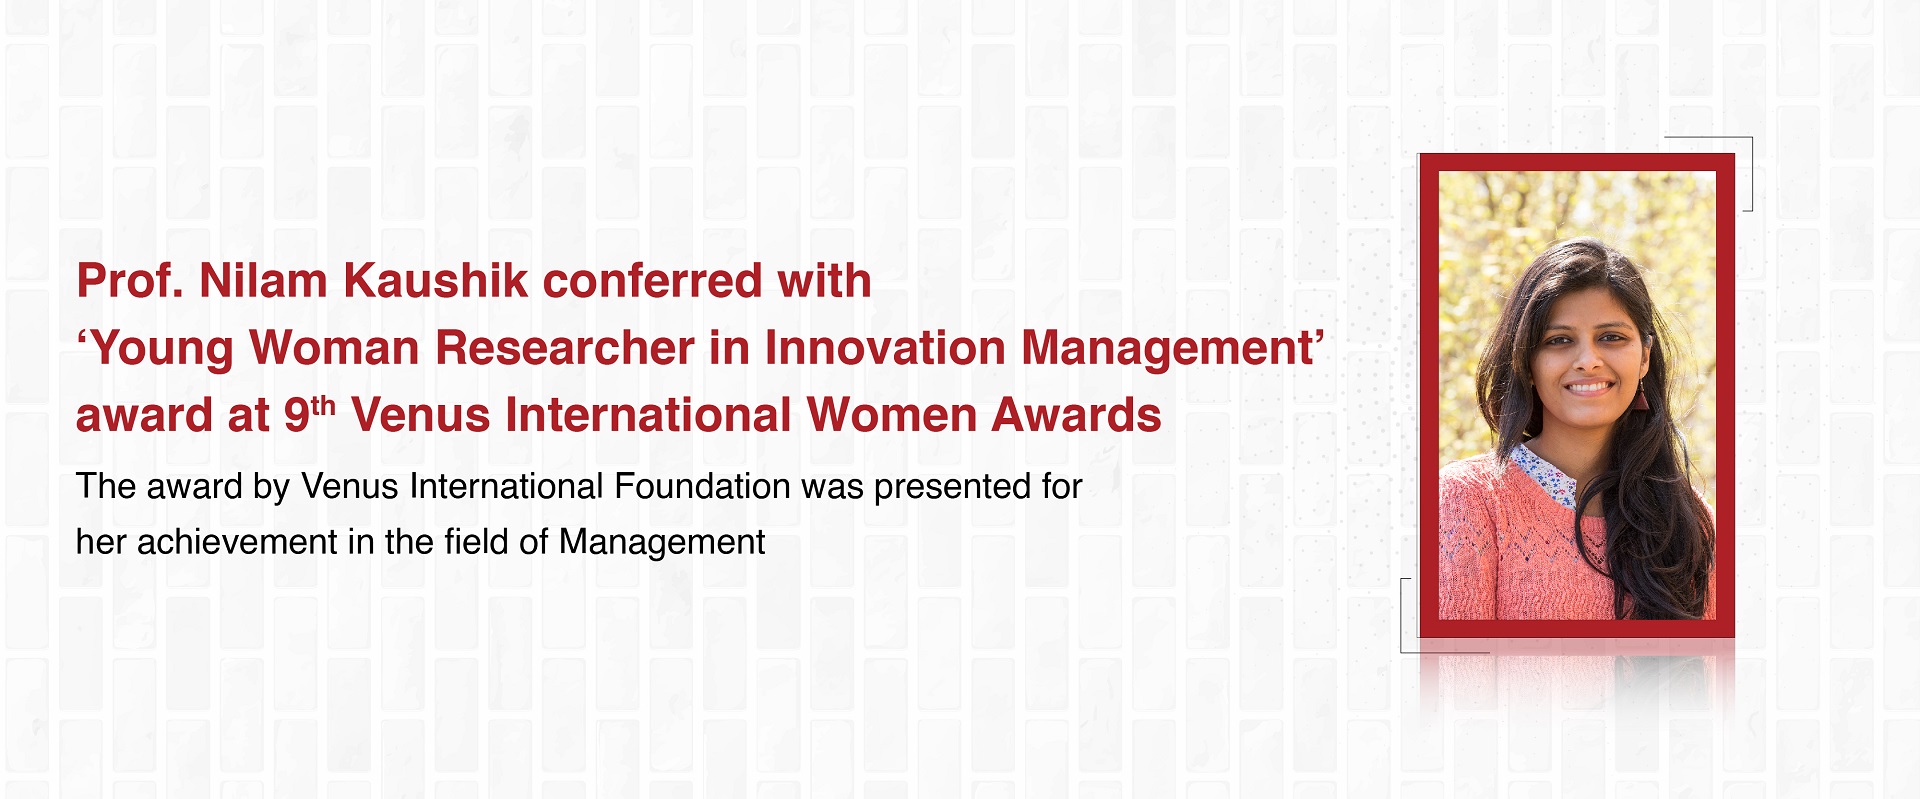 Prof. Nilam Kaushik conferred with ‘Young Woman Researcher in Innovation Management’ award at 9th Venus International Women Awards 